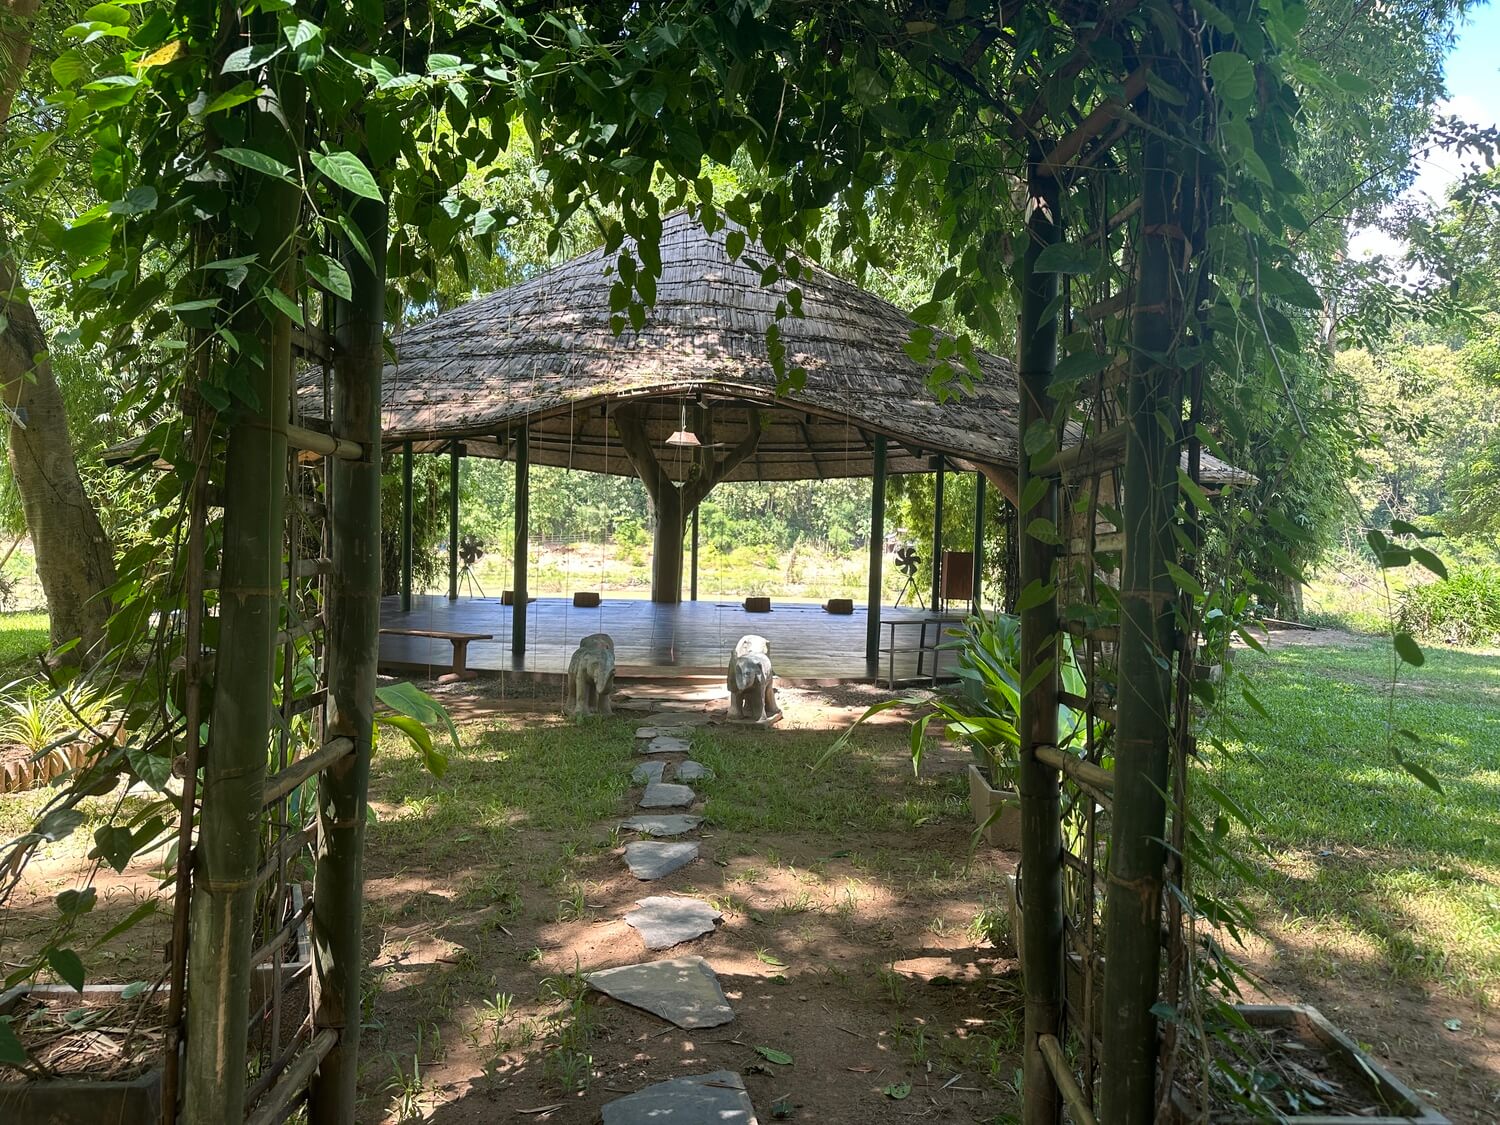 A gazebo in the middle of a grassy area in Luang Prabang.